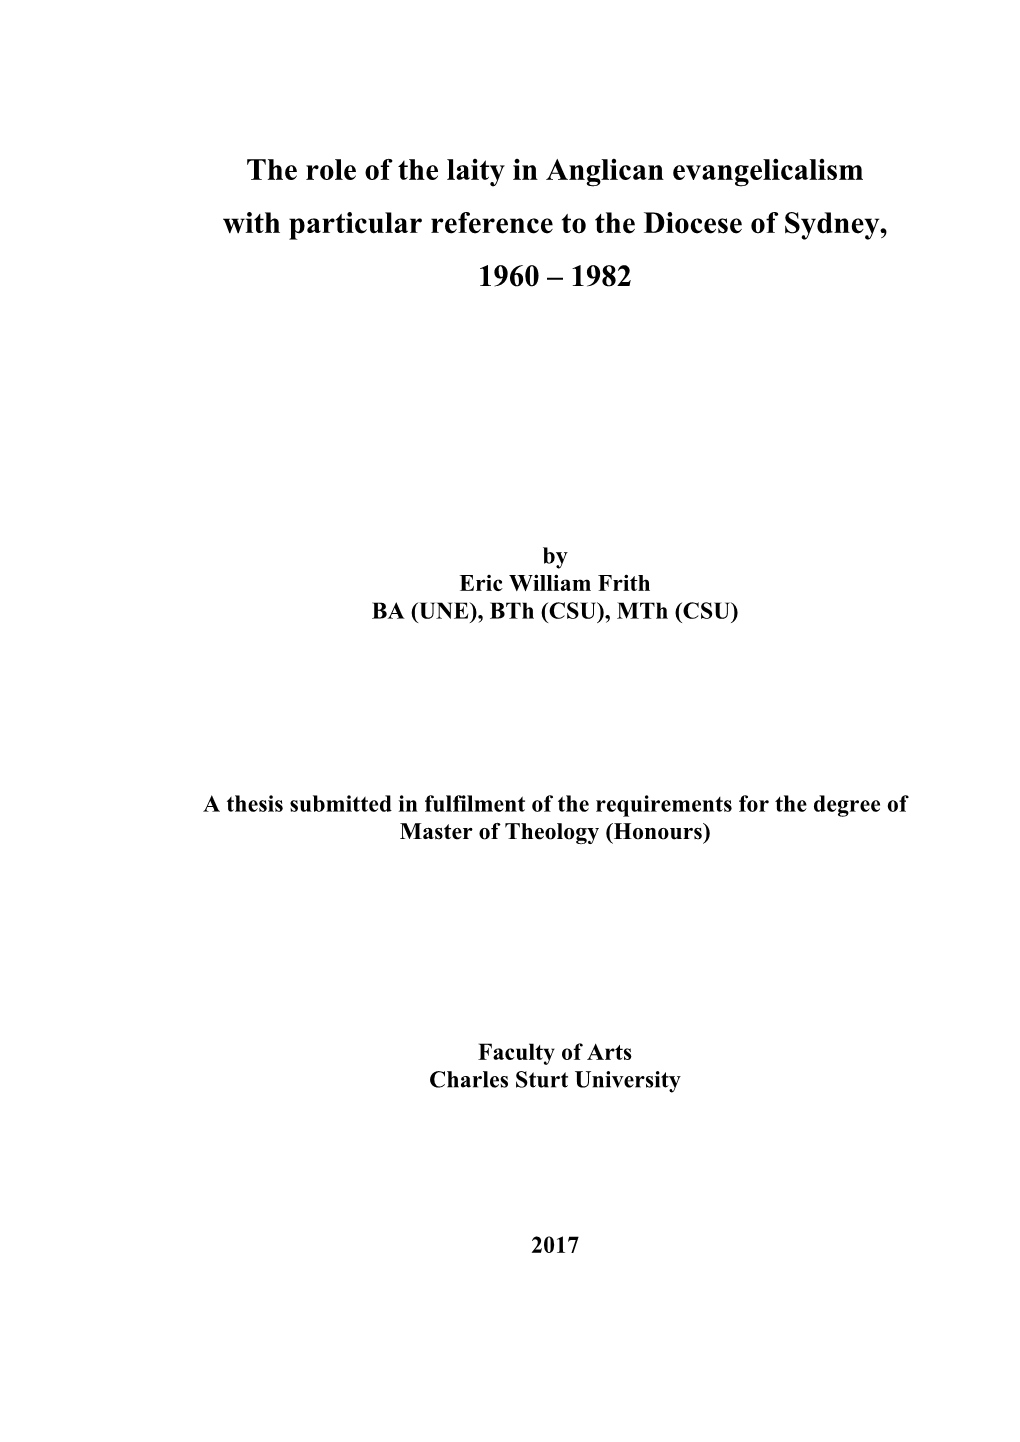 The Role of the Laity in Anglican Evangelicalism with Particular Reference to the Diocese of Sydney, 1960 – 1982